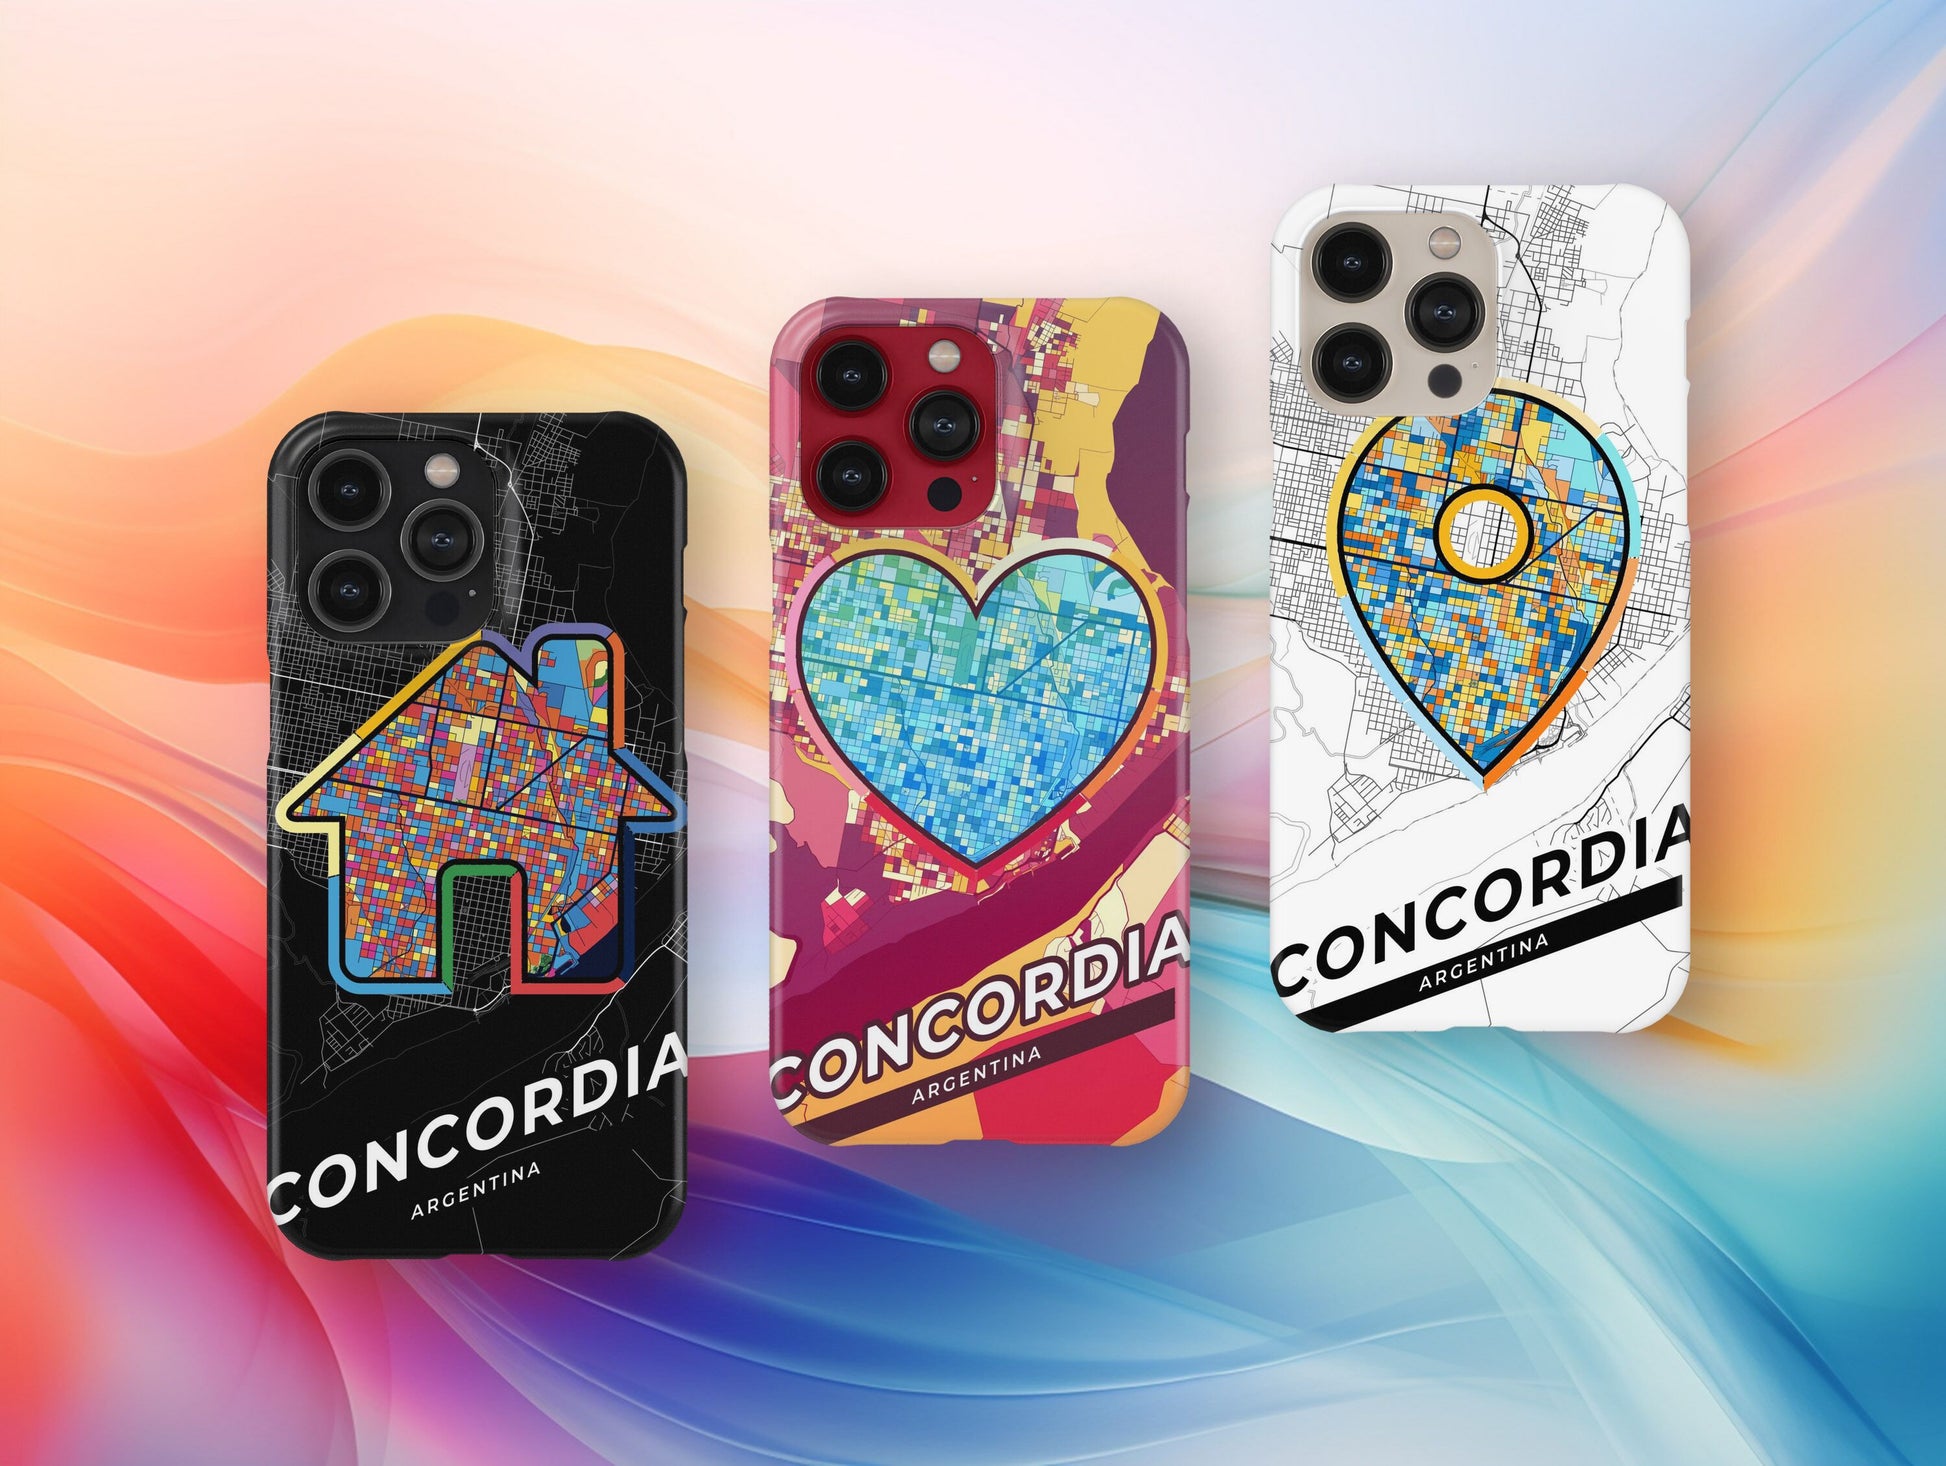 Concordia Argentina slim phone case with colorful icon. Birthday, wedding or housewarming gift. Couple match cases.